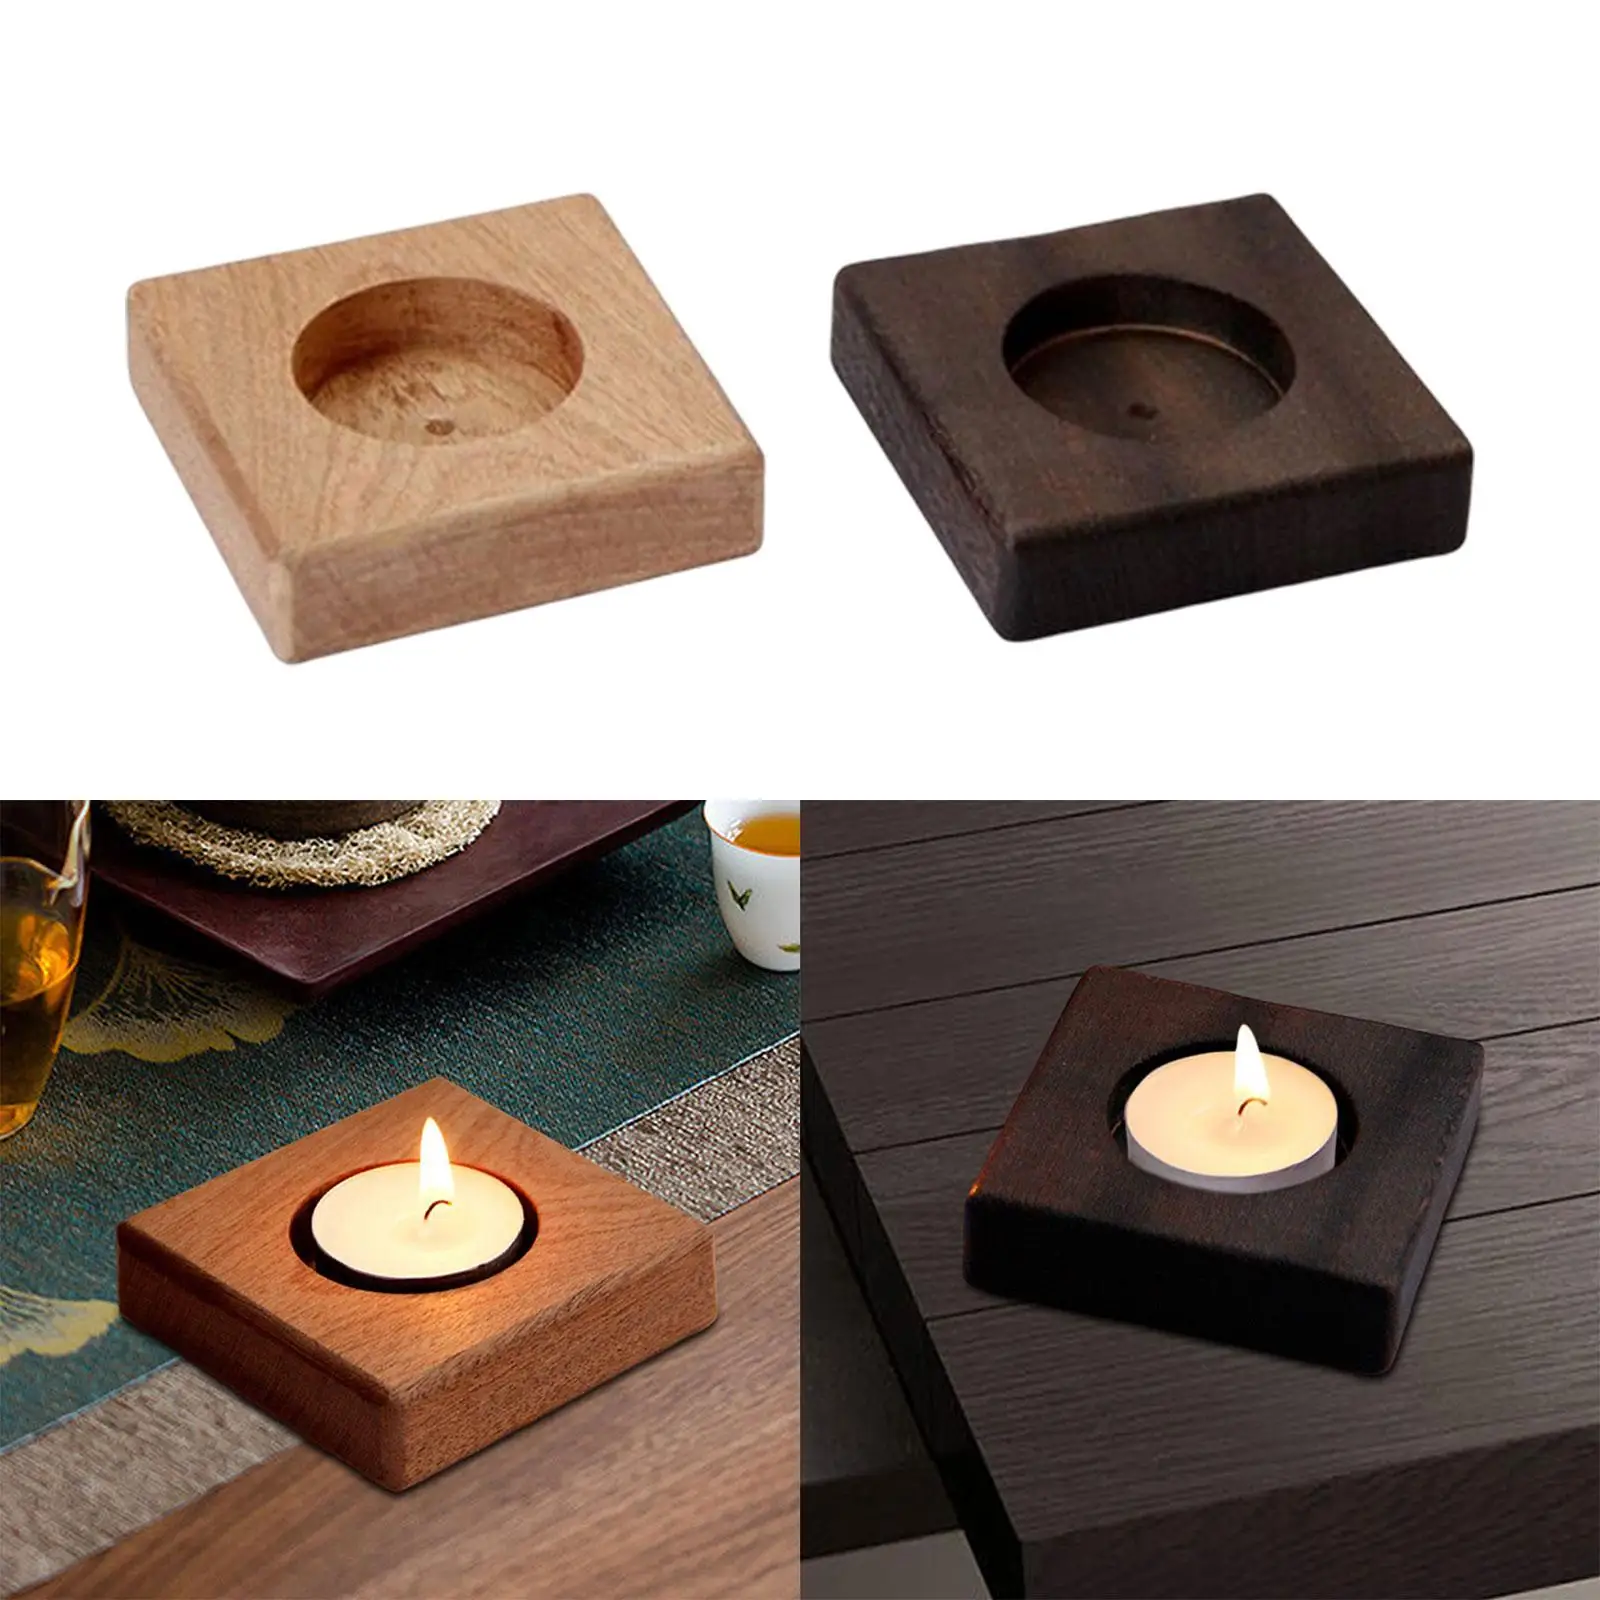 Wooden Candle Holder, Tealight Holders, Votive Candle Holders, Decorative Candleholder for Wedding Holiday Birthday Decoration